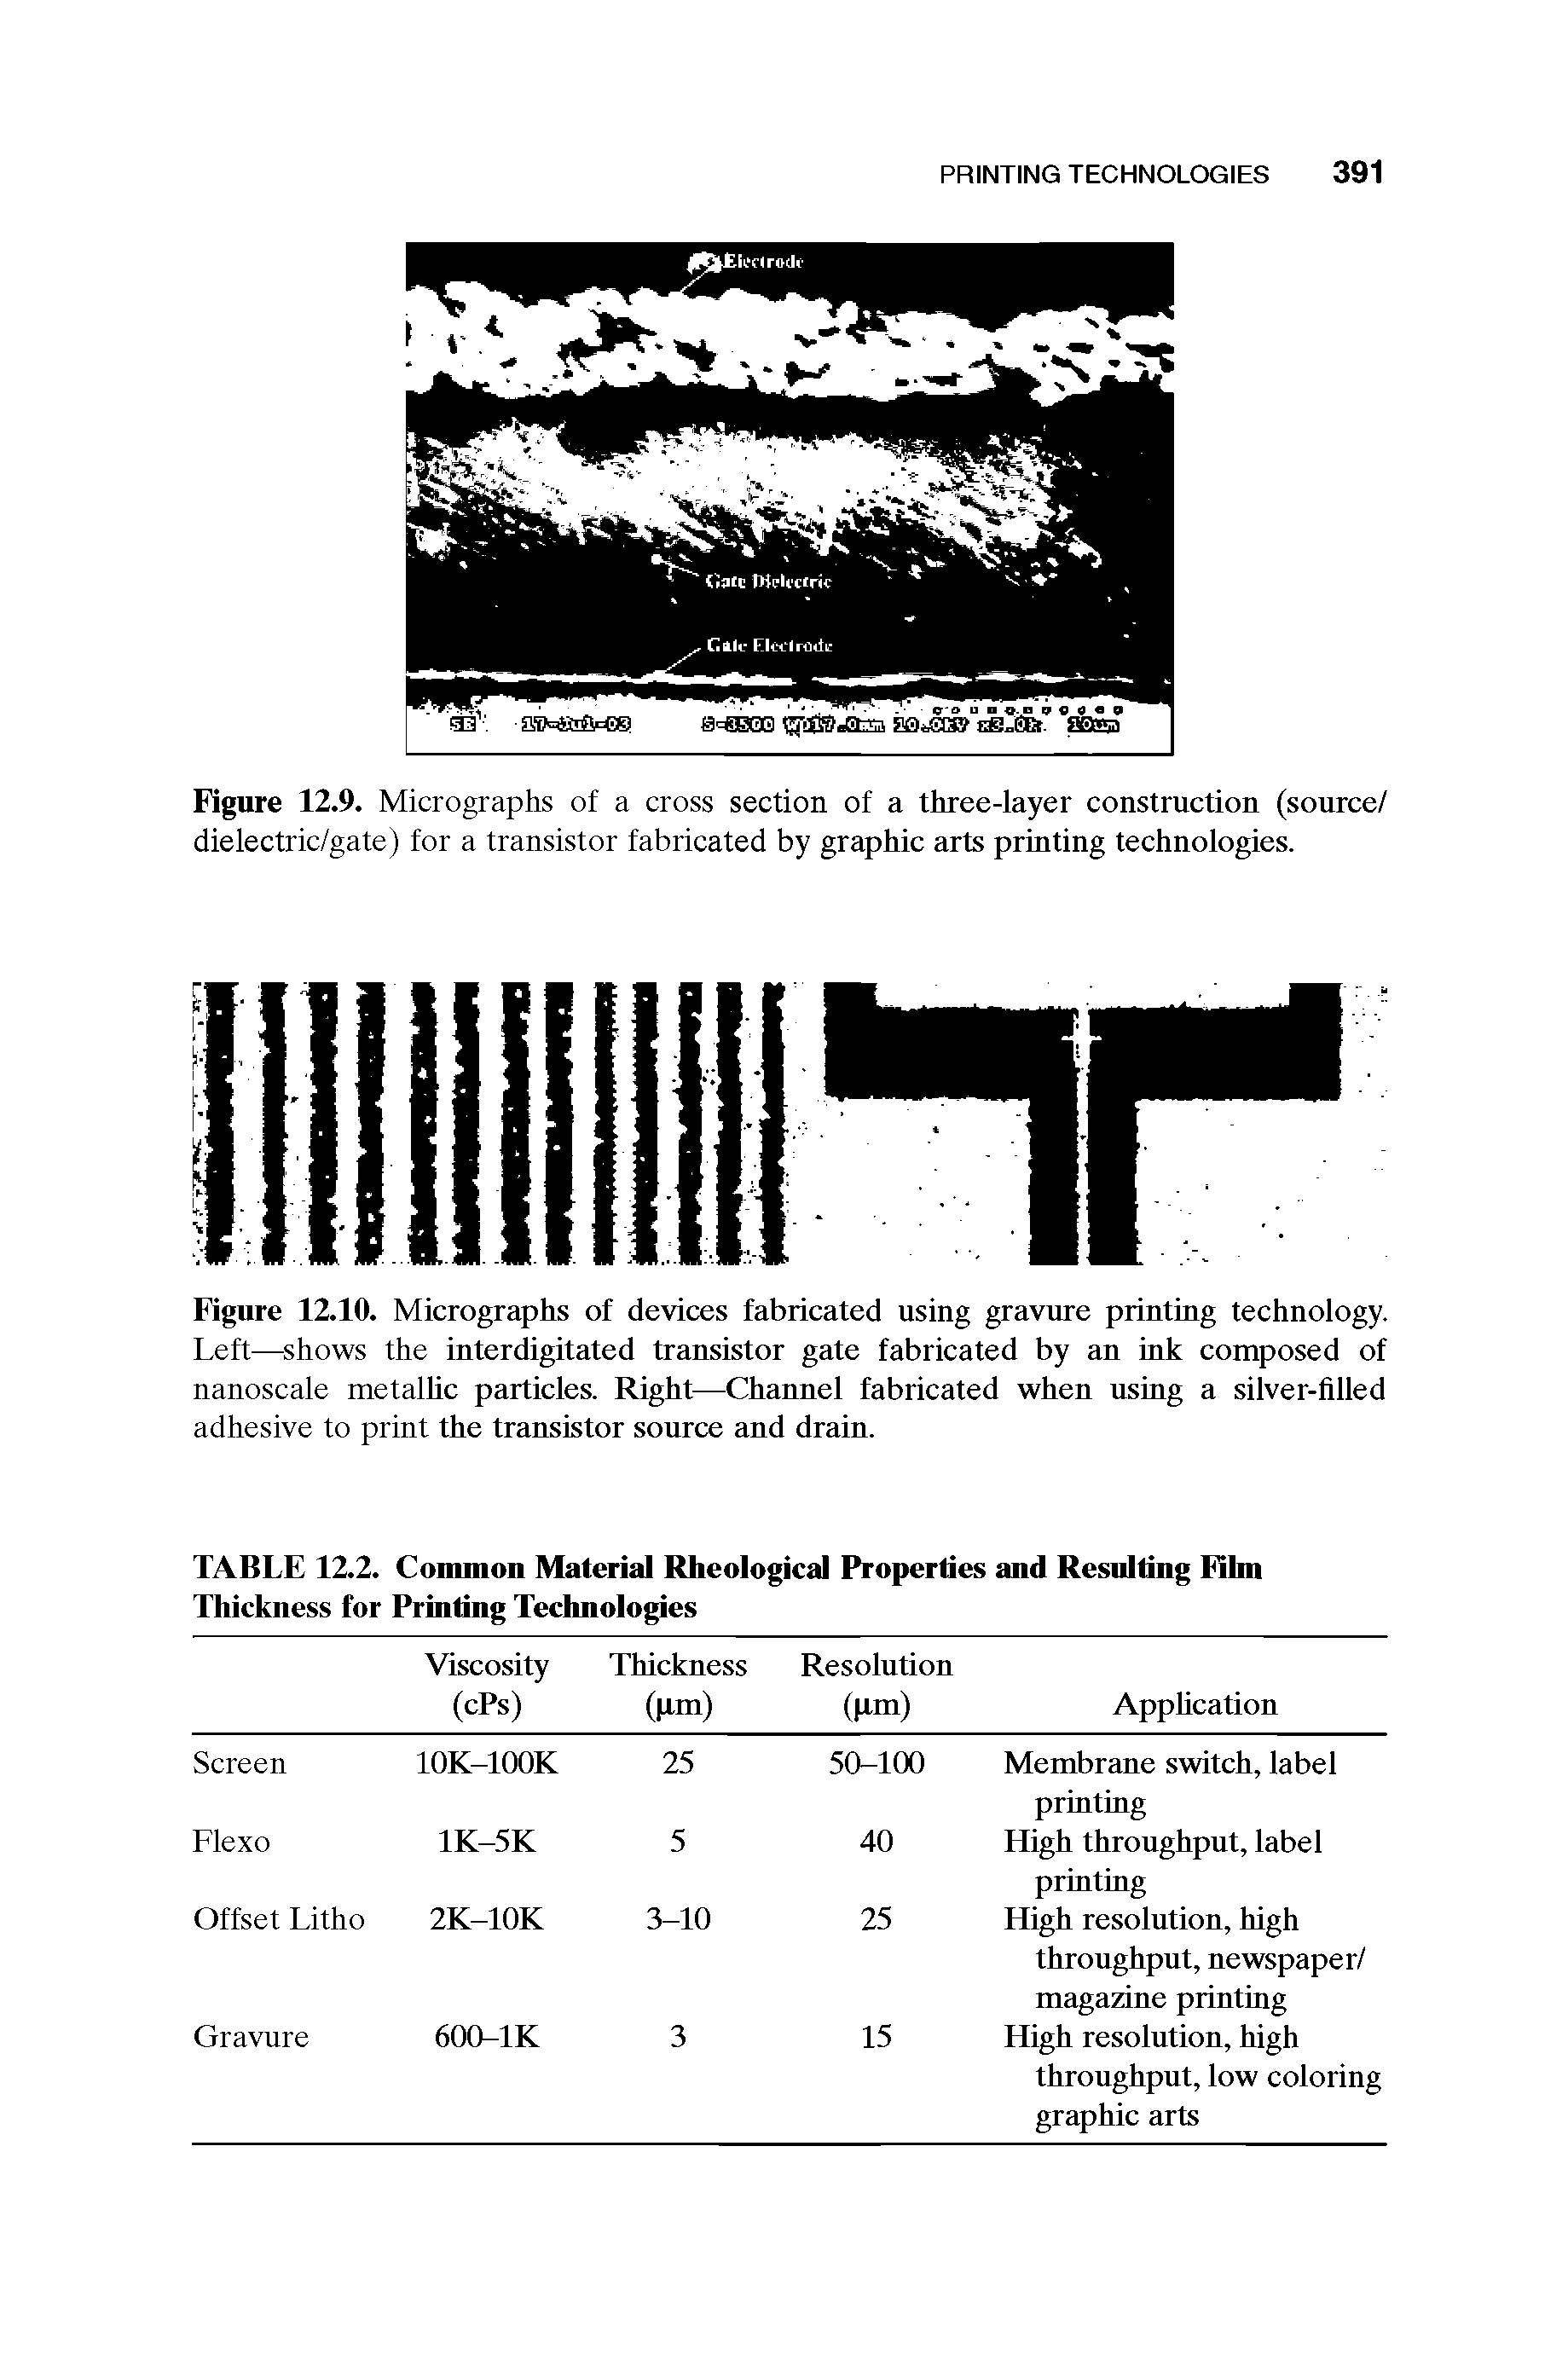 Figure 12.9. Micrographs of a cross section of a three-layer construction (source/ dielectric/gate) for a transistor fabricated by graphic arts printing technologies.